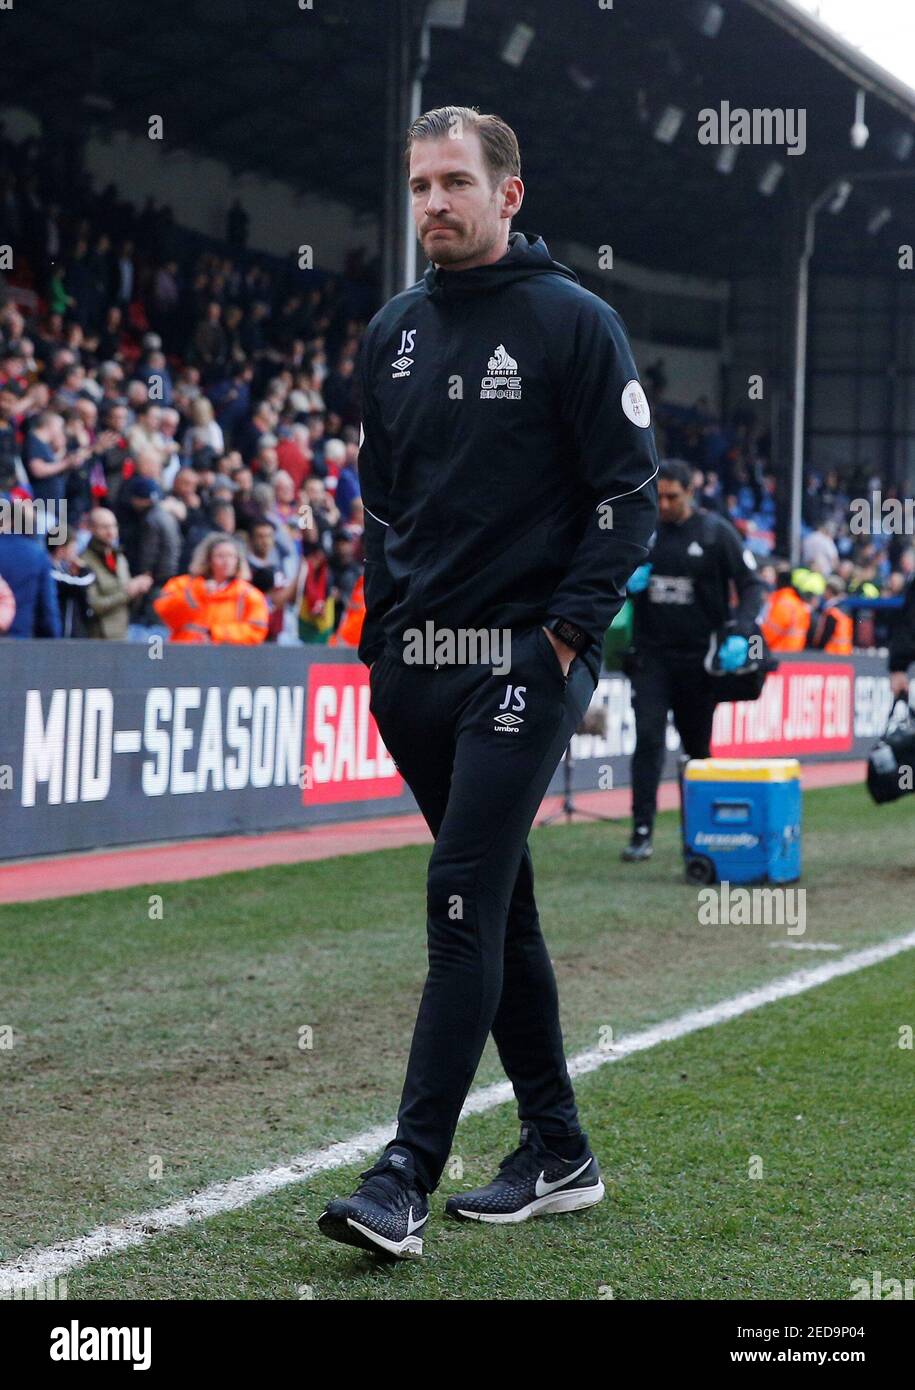 Soccer Football - Premier League - Crystal Palace v Huddersfield Town - Selhurst Park, London, Britain - March 30, 2019  Huddersfield Town manager Jan Siewert looks dejected after the match as they are relegated from the Premier League  Action Images via Reuters/Andrew Couldridge  EDITORIAL USE ONLY. No use with unauthorized audio, video, data, fixture lists, club/league logos or 'live' services. Online in-match use limited to 75 images, no video emulation. No use in betting, games or single club/league/player publications.  Please contact your account representative for further details. Stock Photo